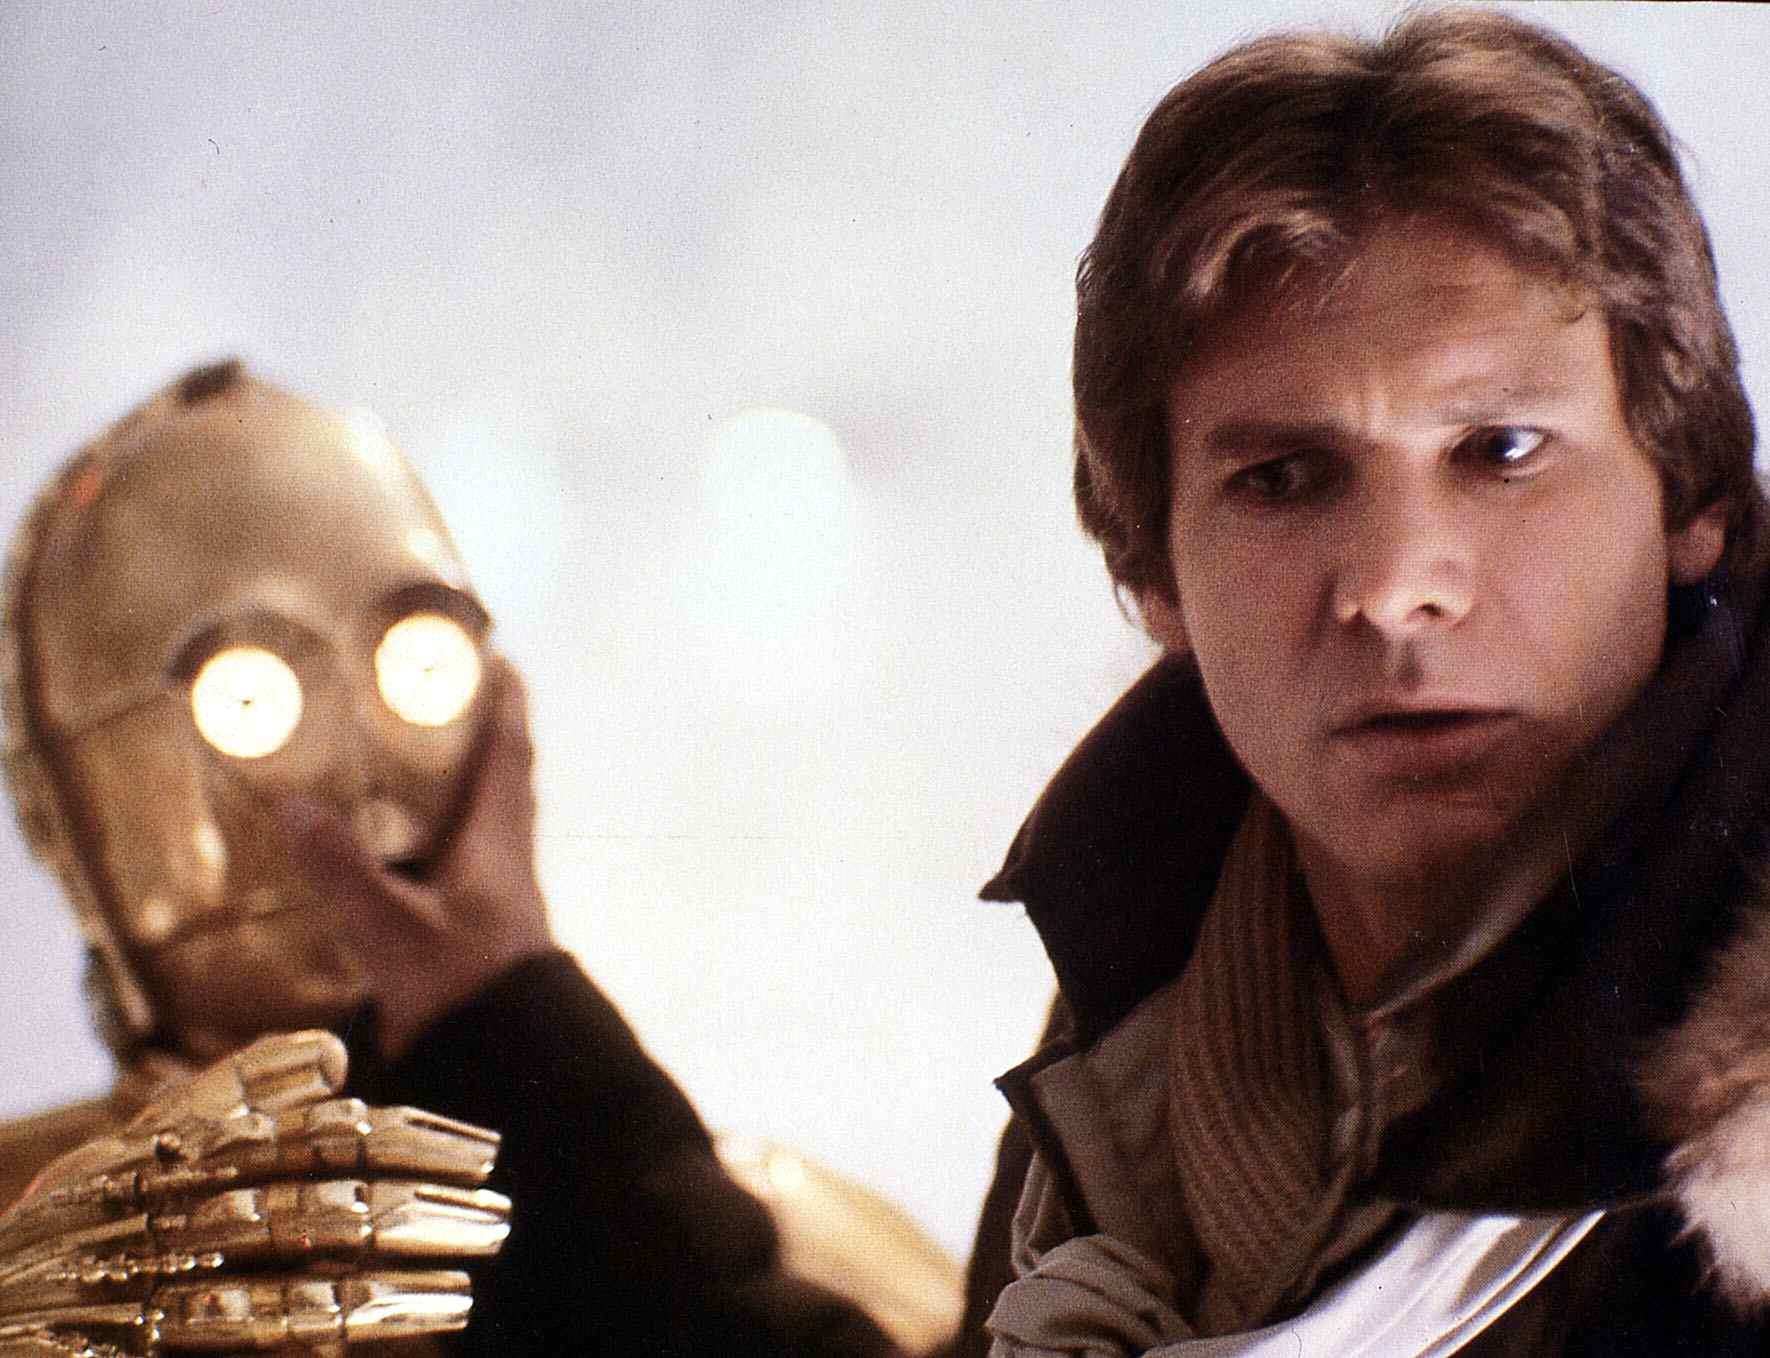 Han Solo putting his hand on C-3PO's mouth